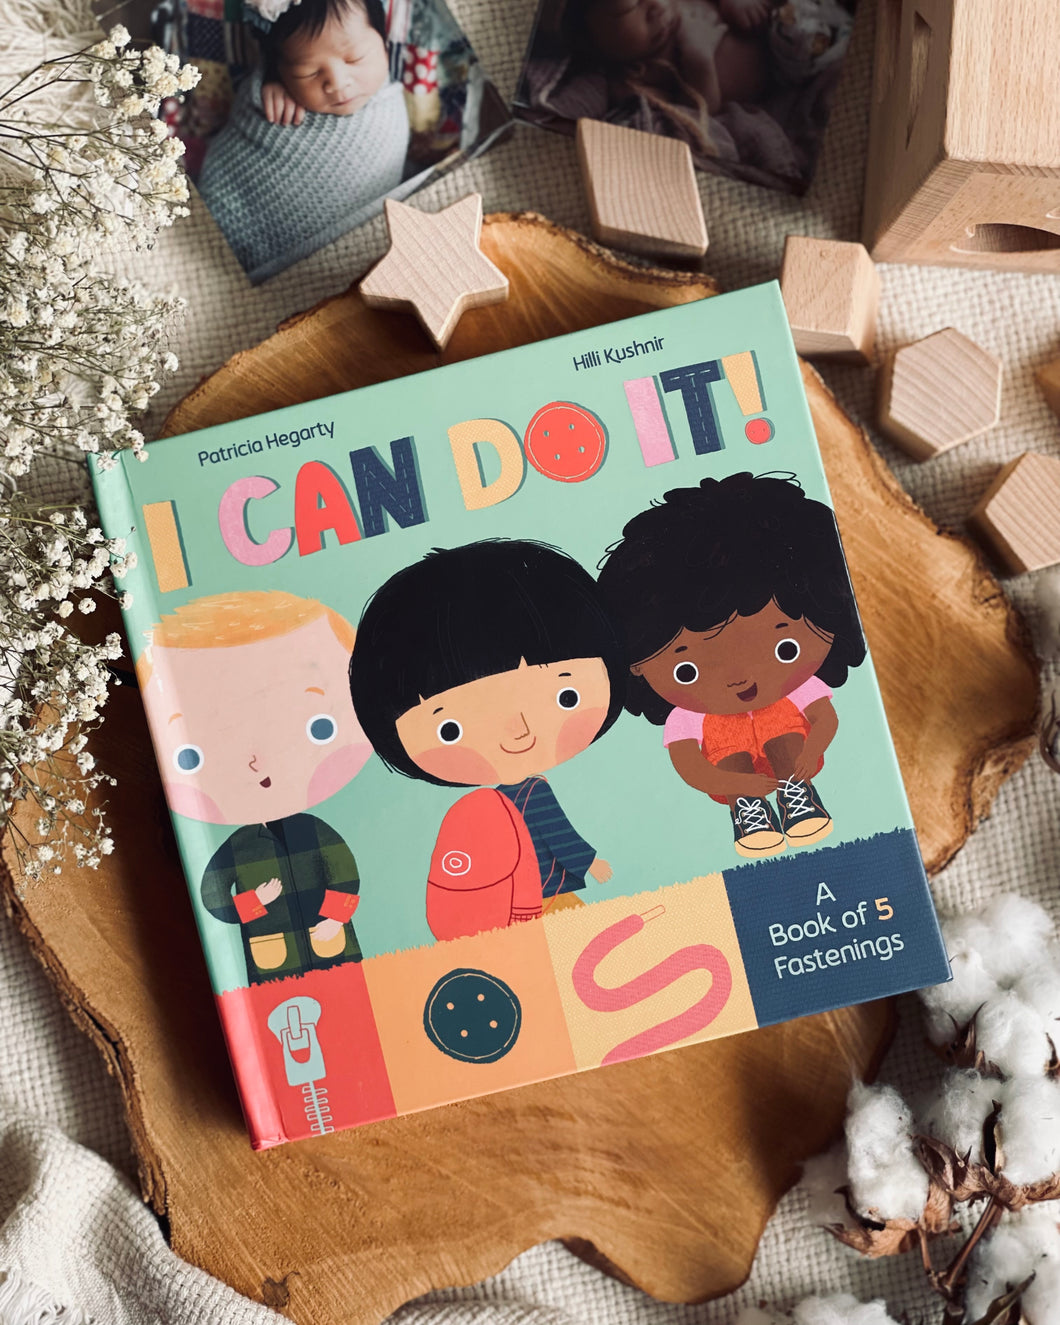 I Can Do It - A book of fasteners by Patricia Hegarty